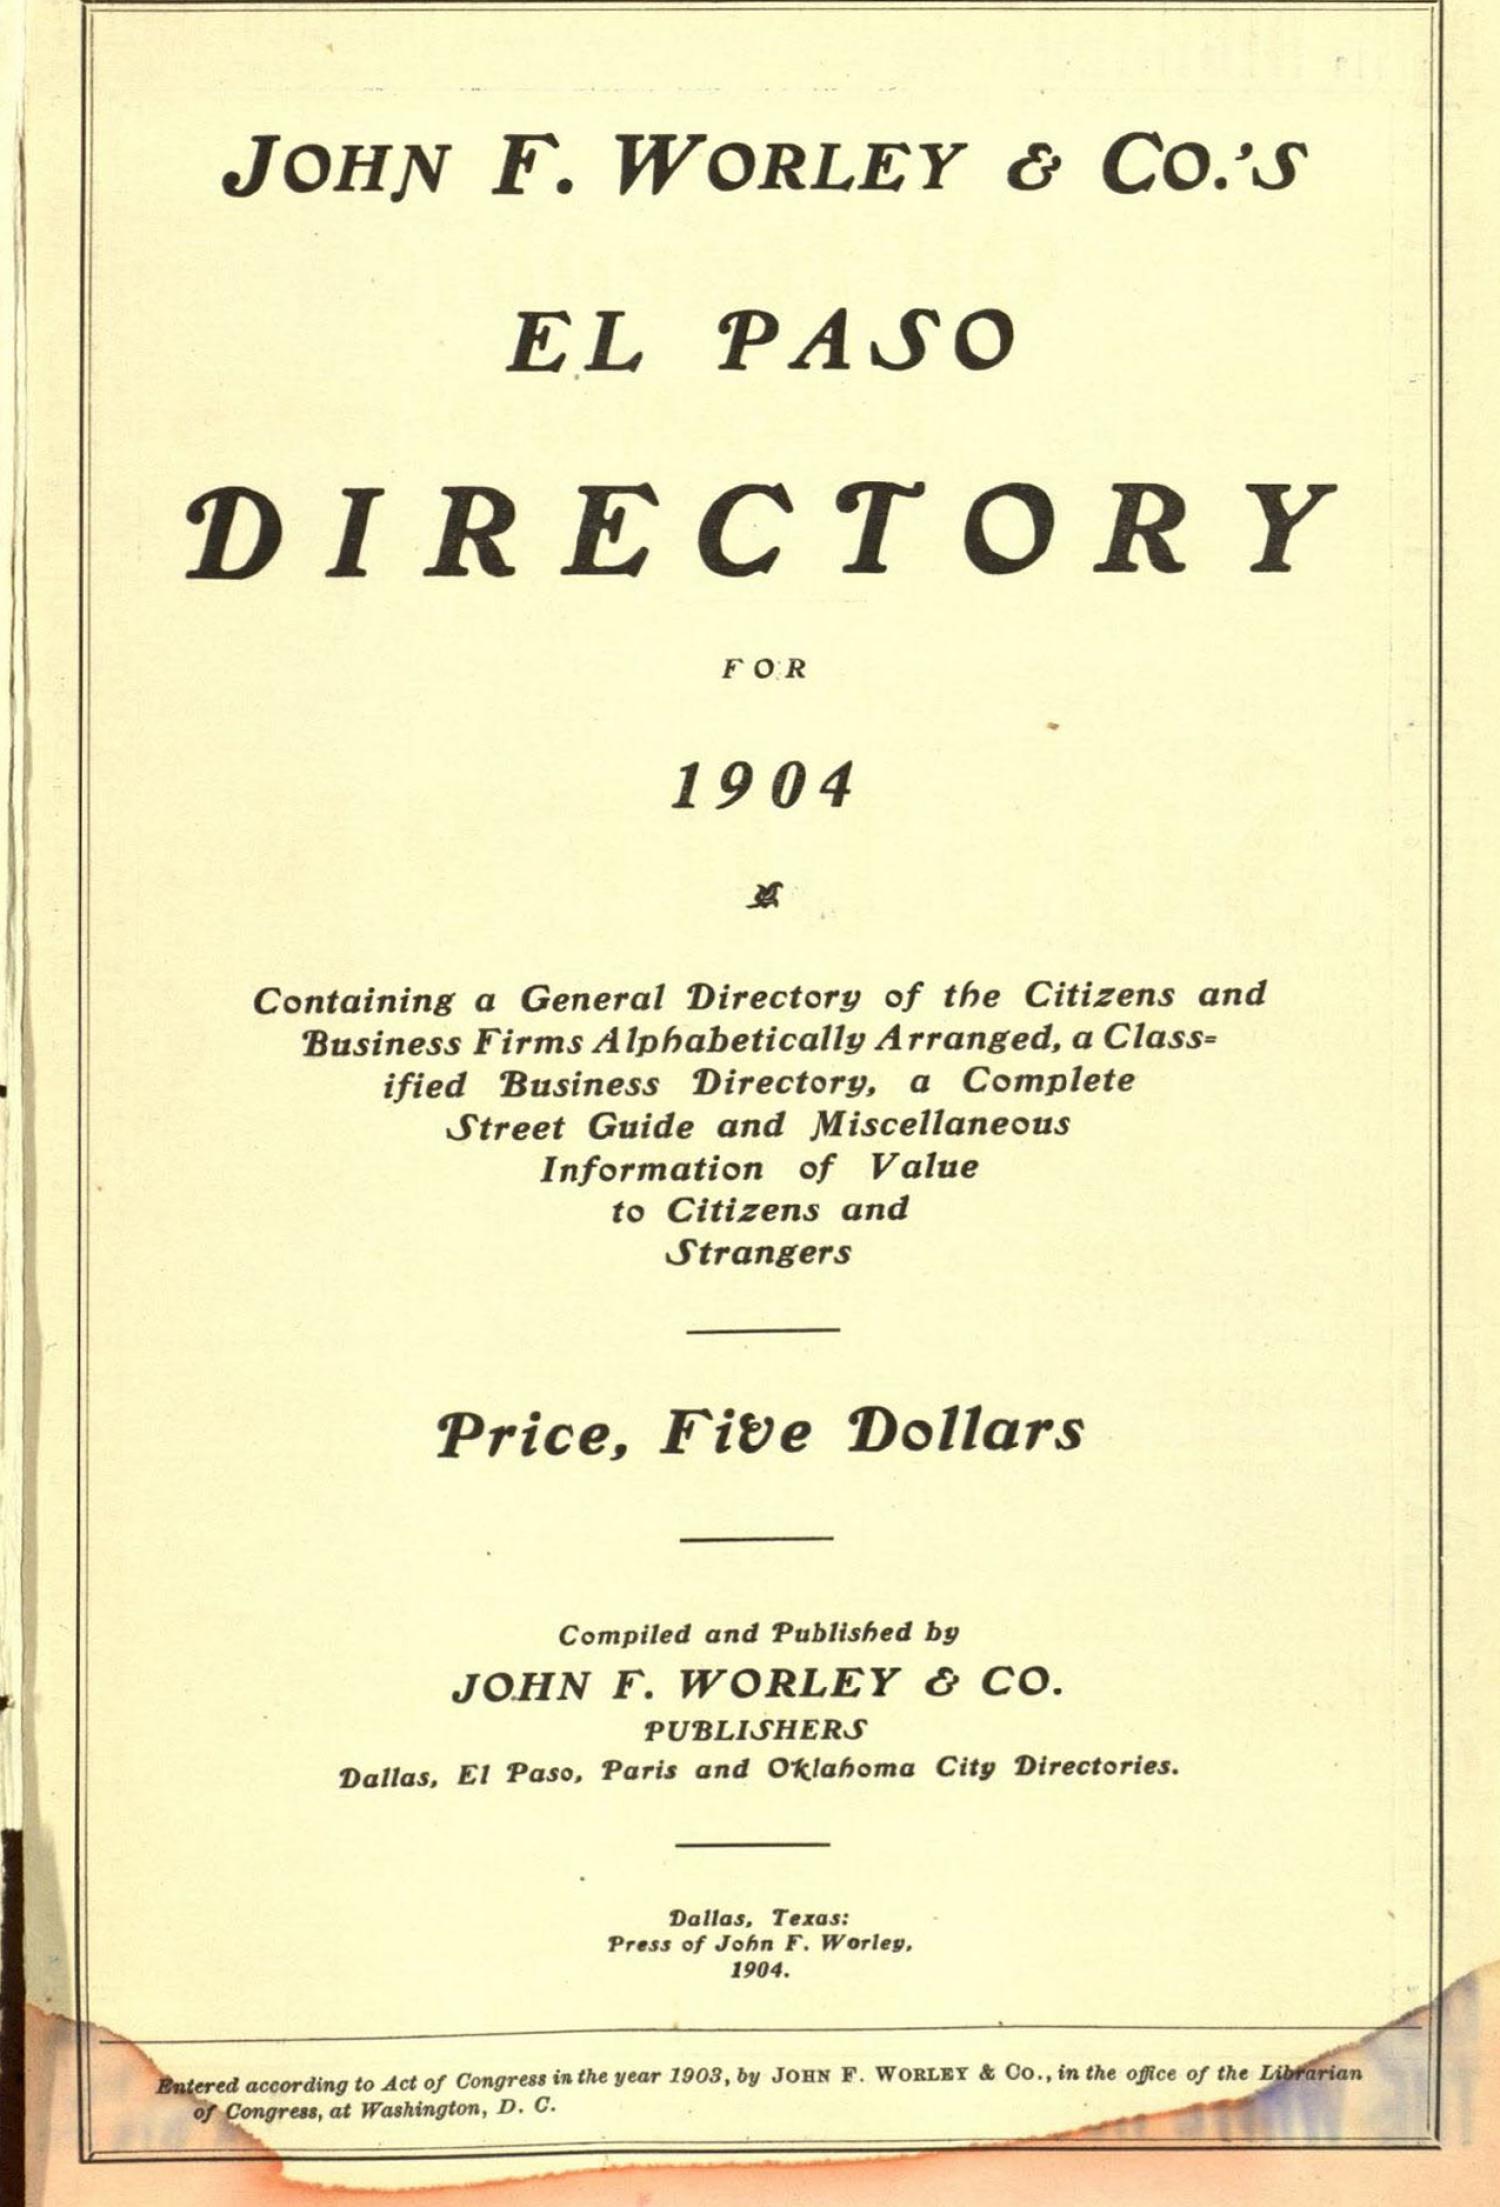 John F. Worley & Co.'s El Paso Directory for 1904
                                                
                                                    1
                                                